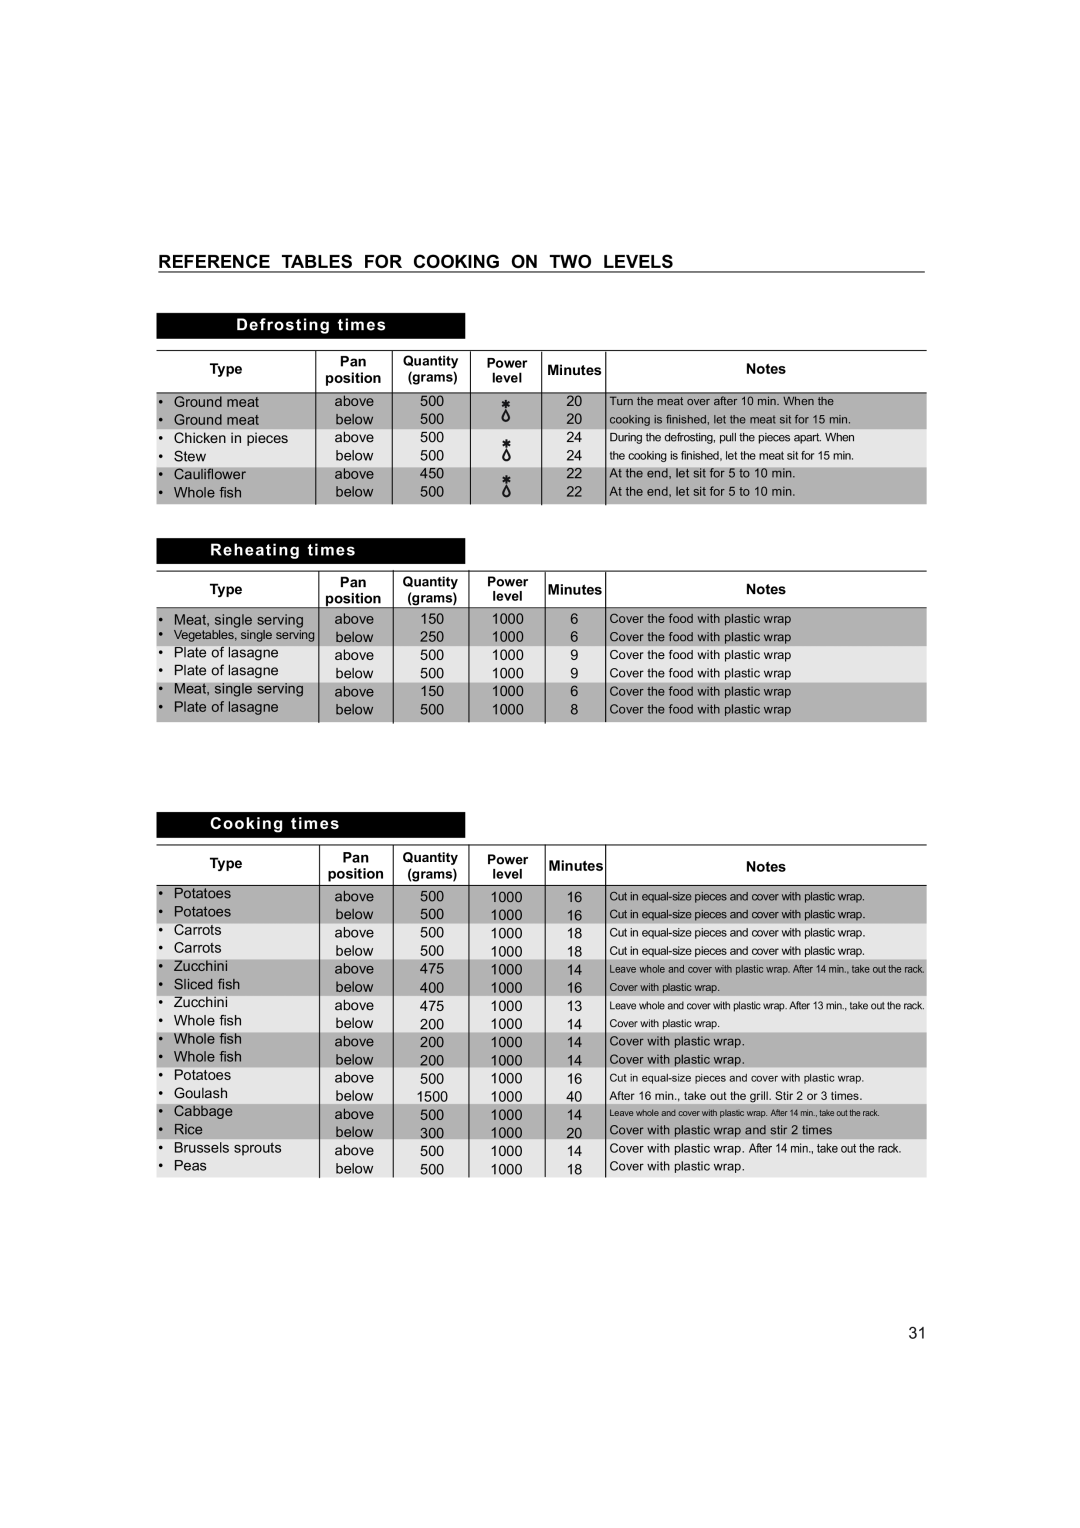 Hotpoint 6685X manual Reference Tables For Cooking On Two Levels, Defrosting times, Reheating times, Cooking times, Type 